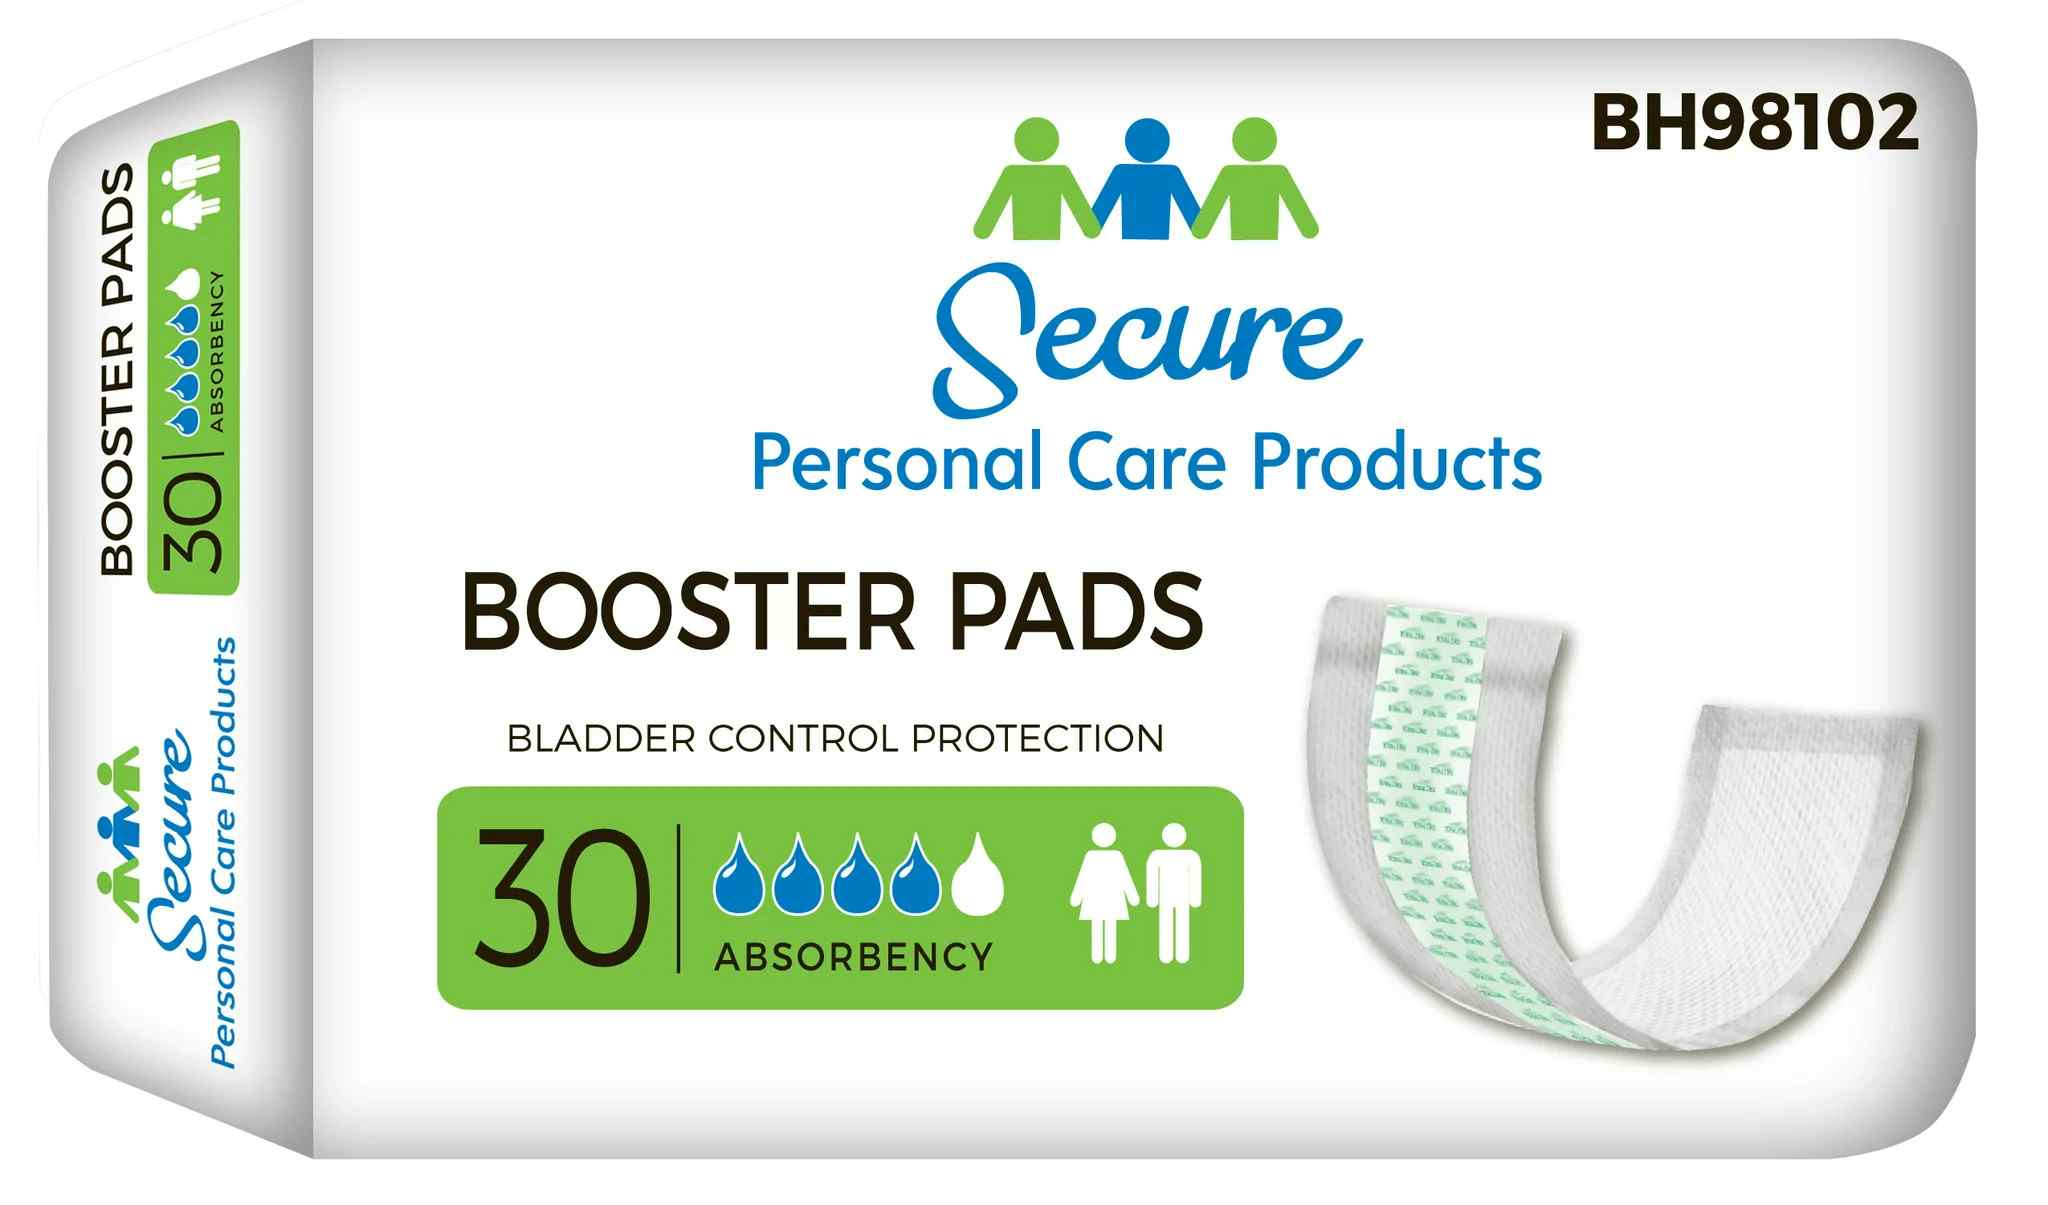 Secure Personal Care Products Duo Booster Pads, Maximum Absorbency, BH98102, Case of 180 (6 Bags)